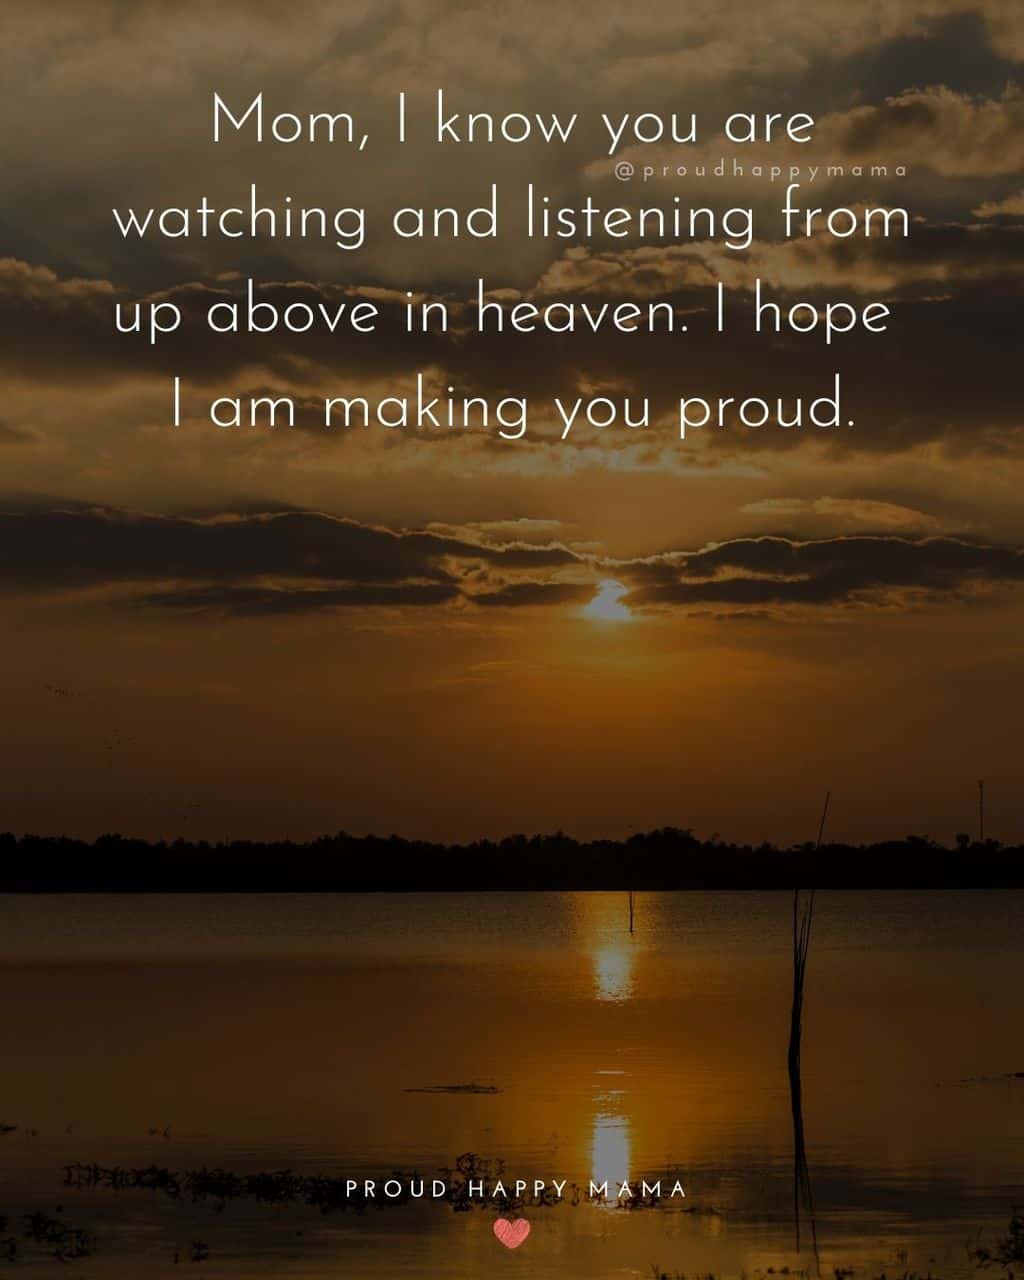 Sunsetting over lake with text overlay, ‘Mom, I know you are watching and listening from up above in heaven. I hope I am making you proud.’